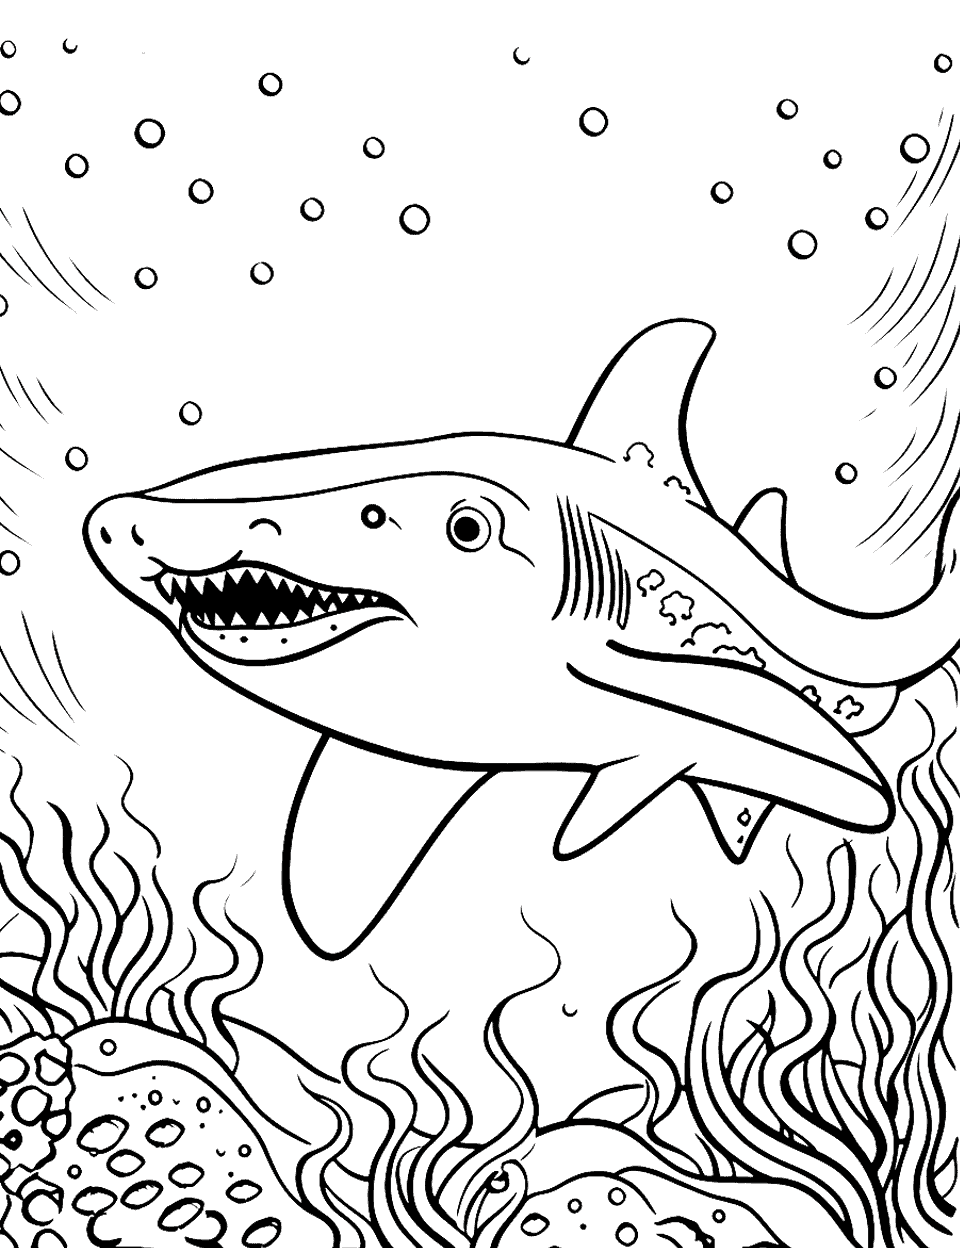 Angel Shark and the Lost Pearl Coloring Page - An angel shark finding a lost pearl on the seafloor.